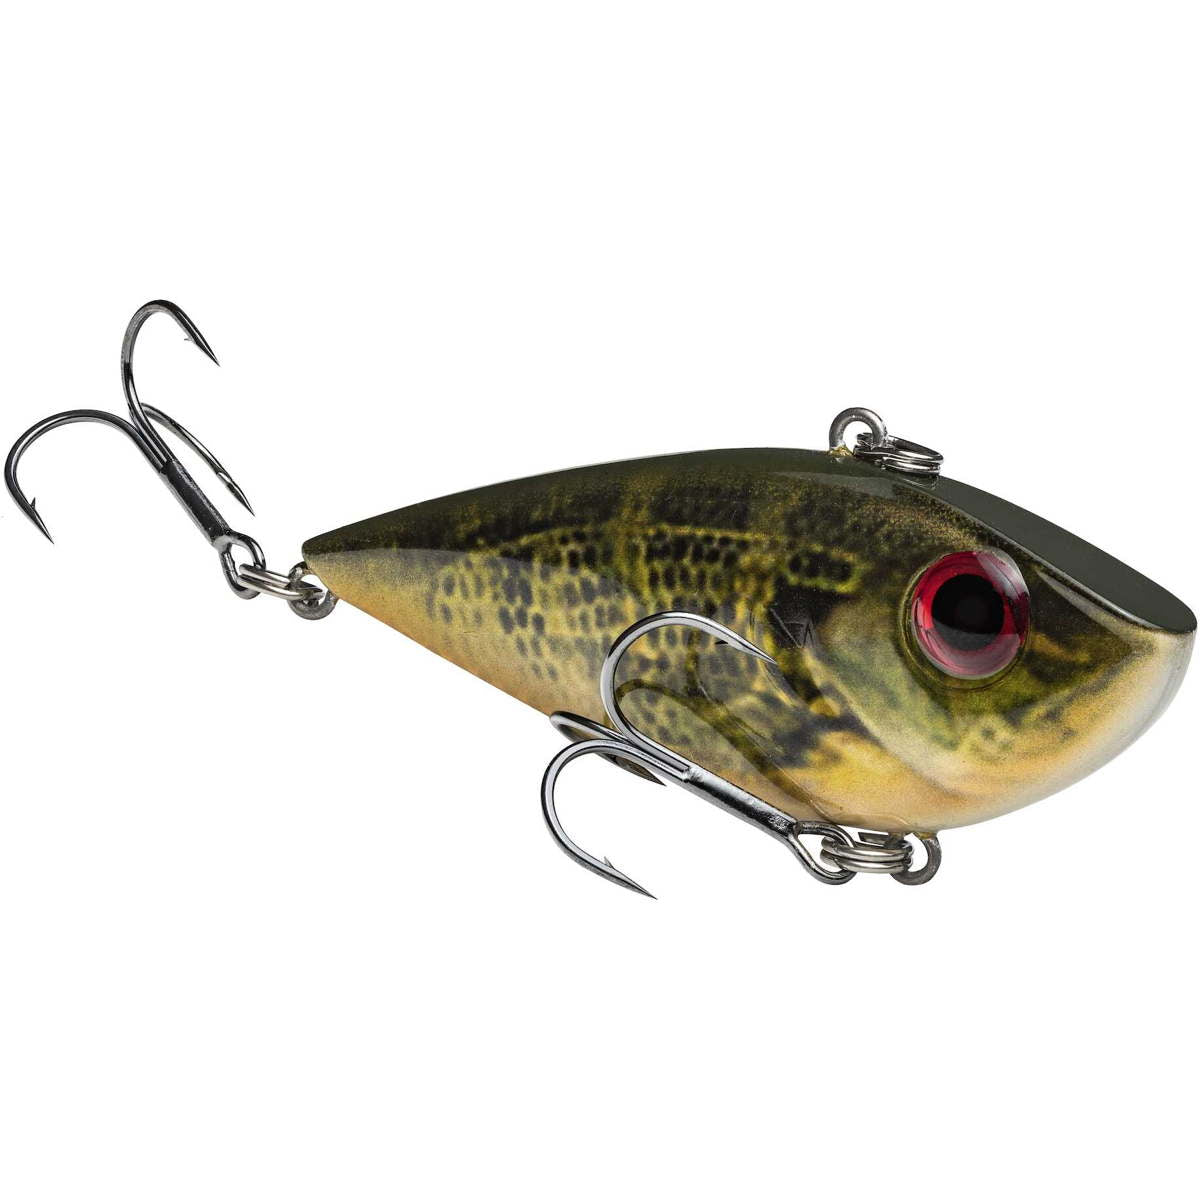 Photo of Strike King Red Eyed Shad Crankbait for sale at United Tackle Shops.